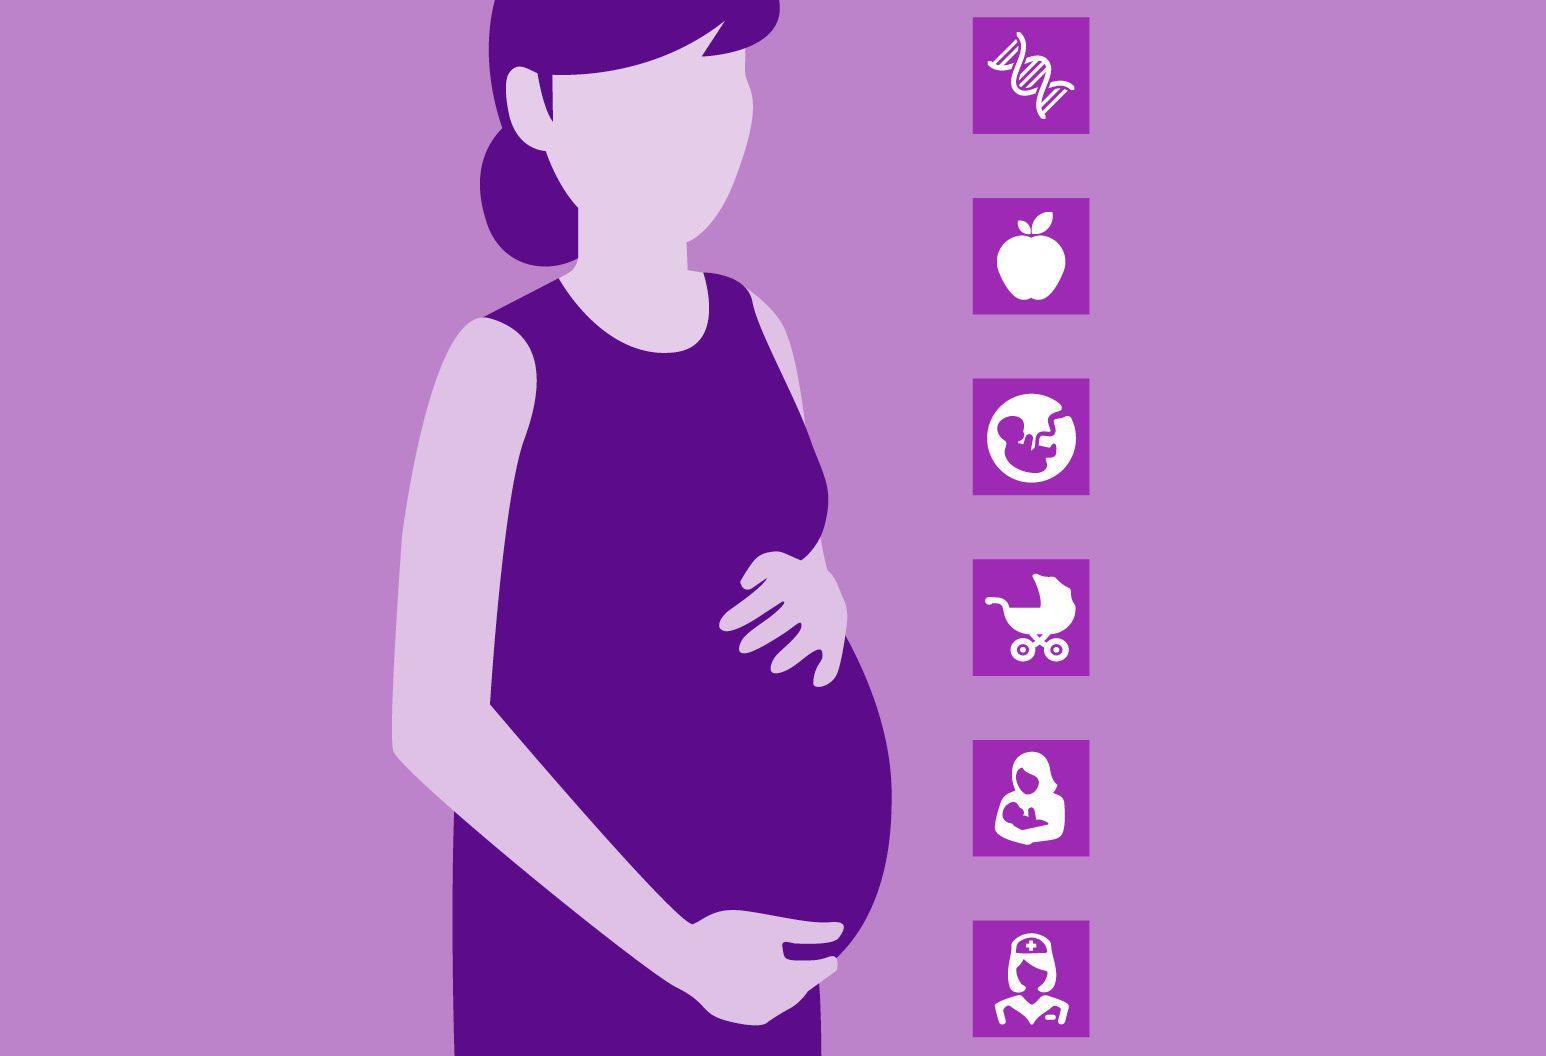 Implications for Prenatal Care and Future Research